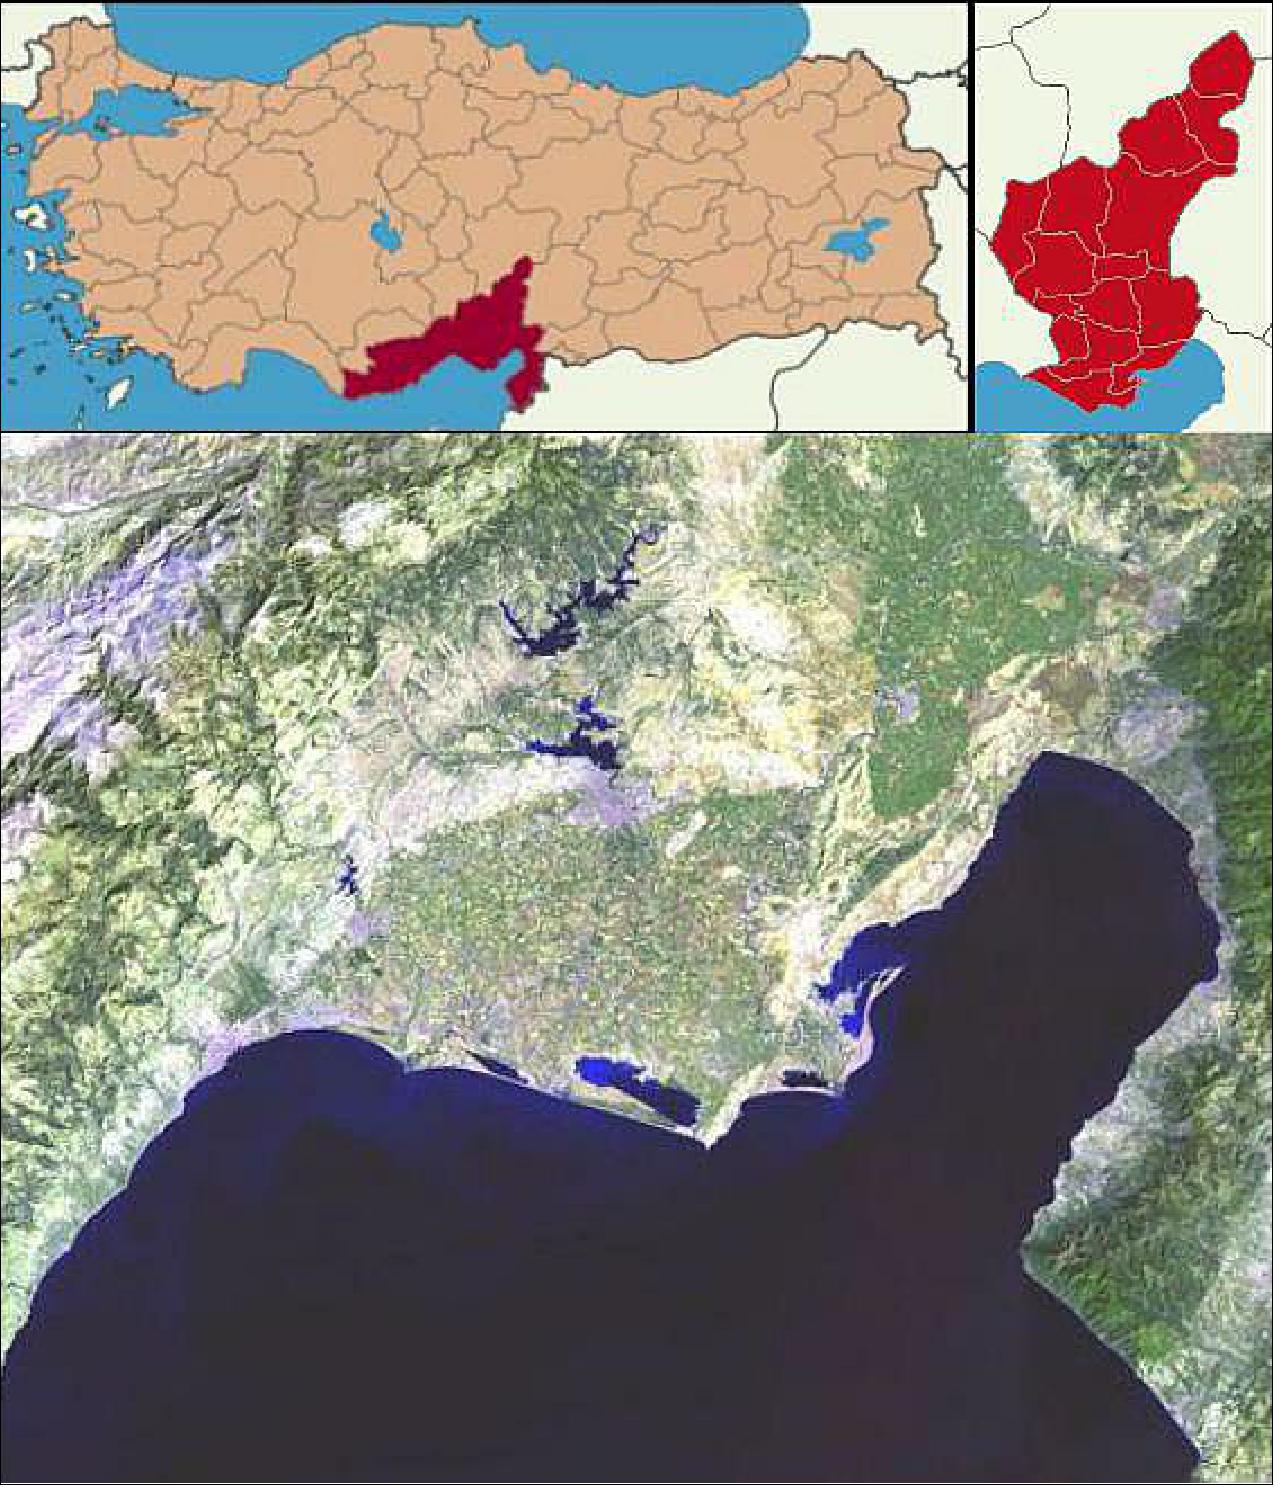 Figure 38: The map and satellite image of the study area (image credit: Istanbul Technical University)